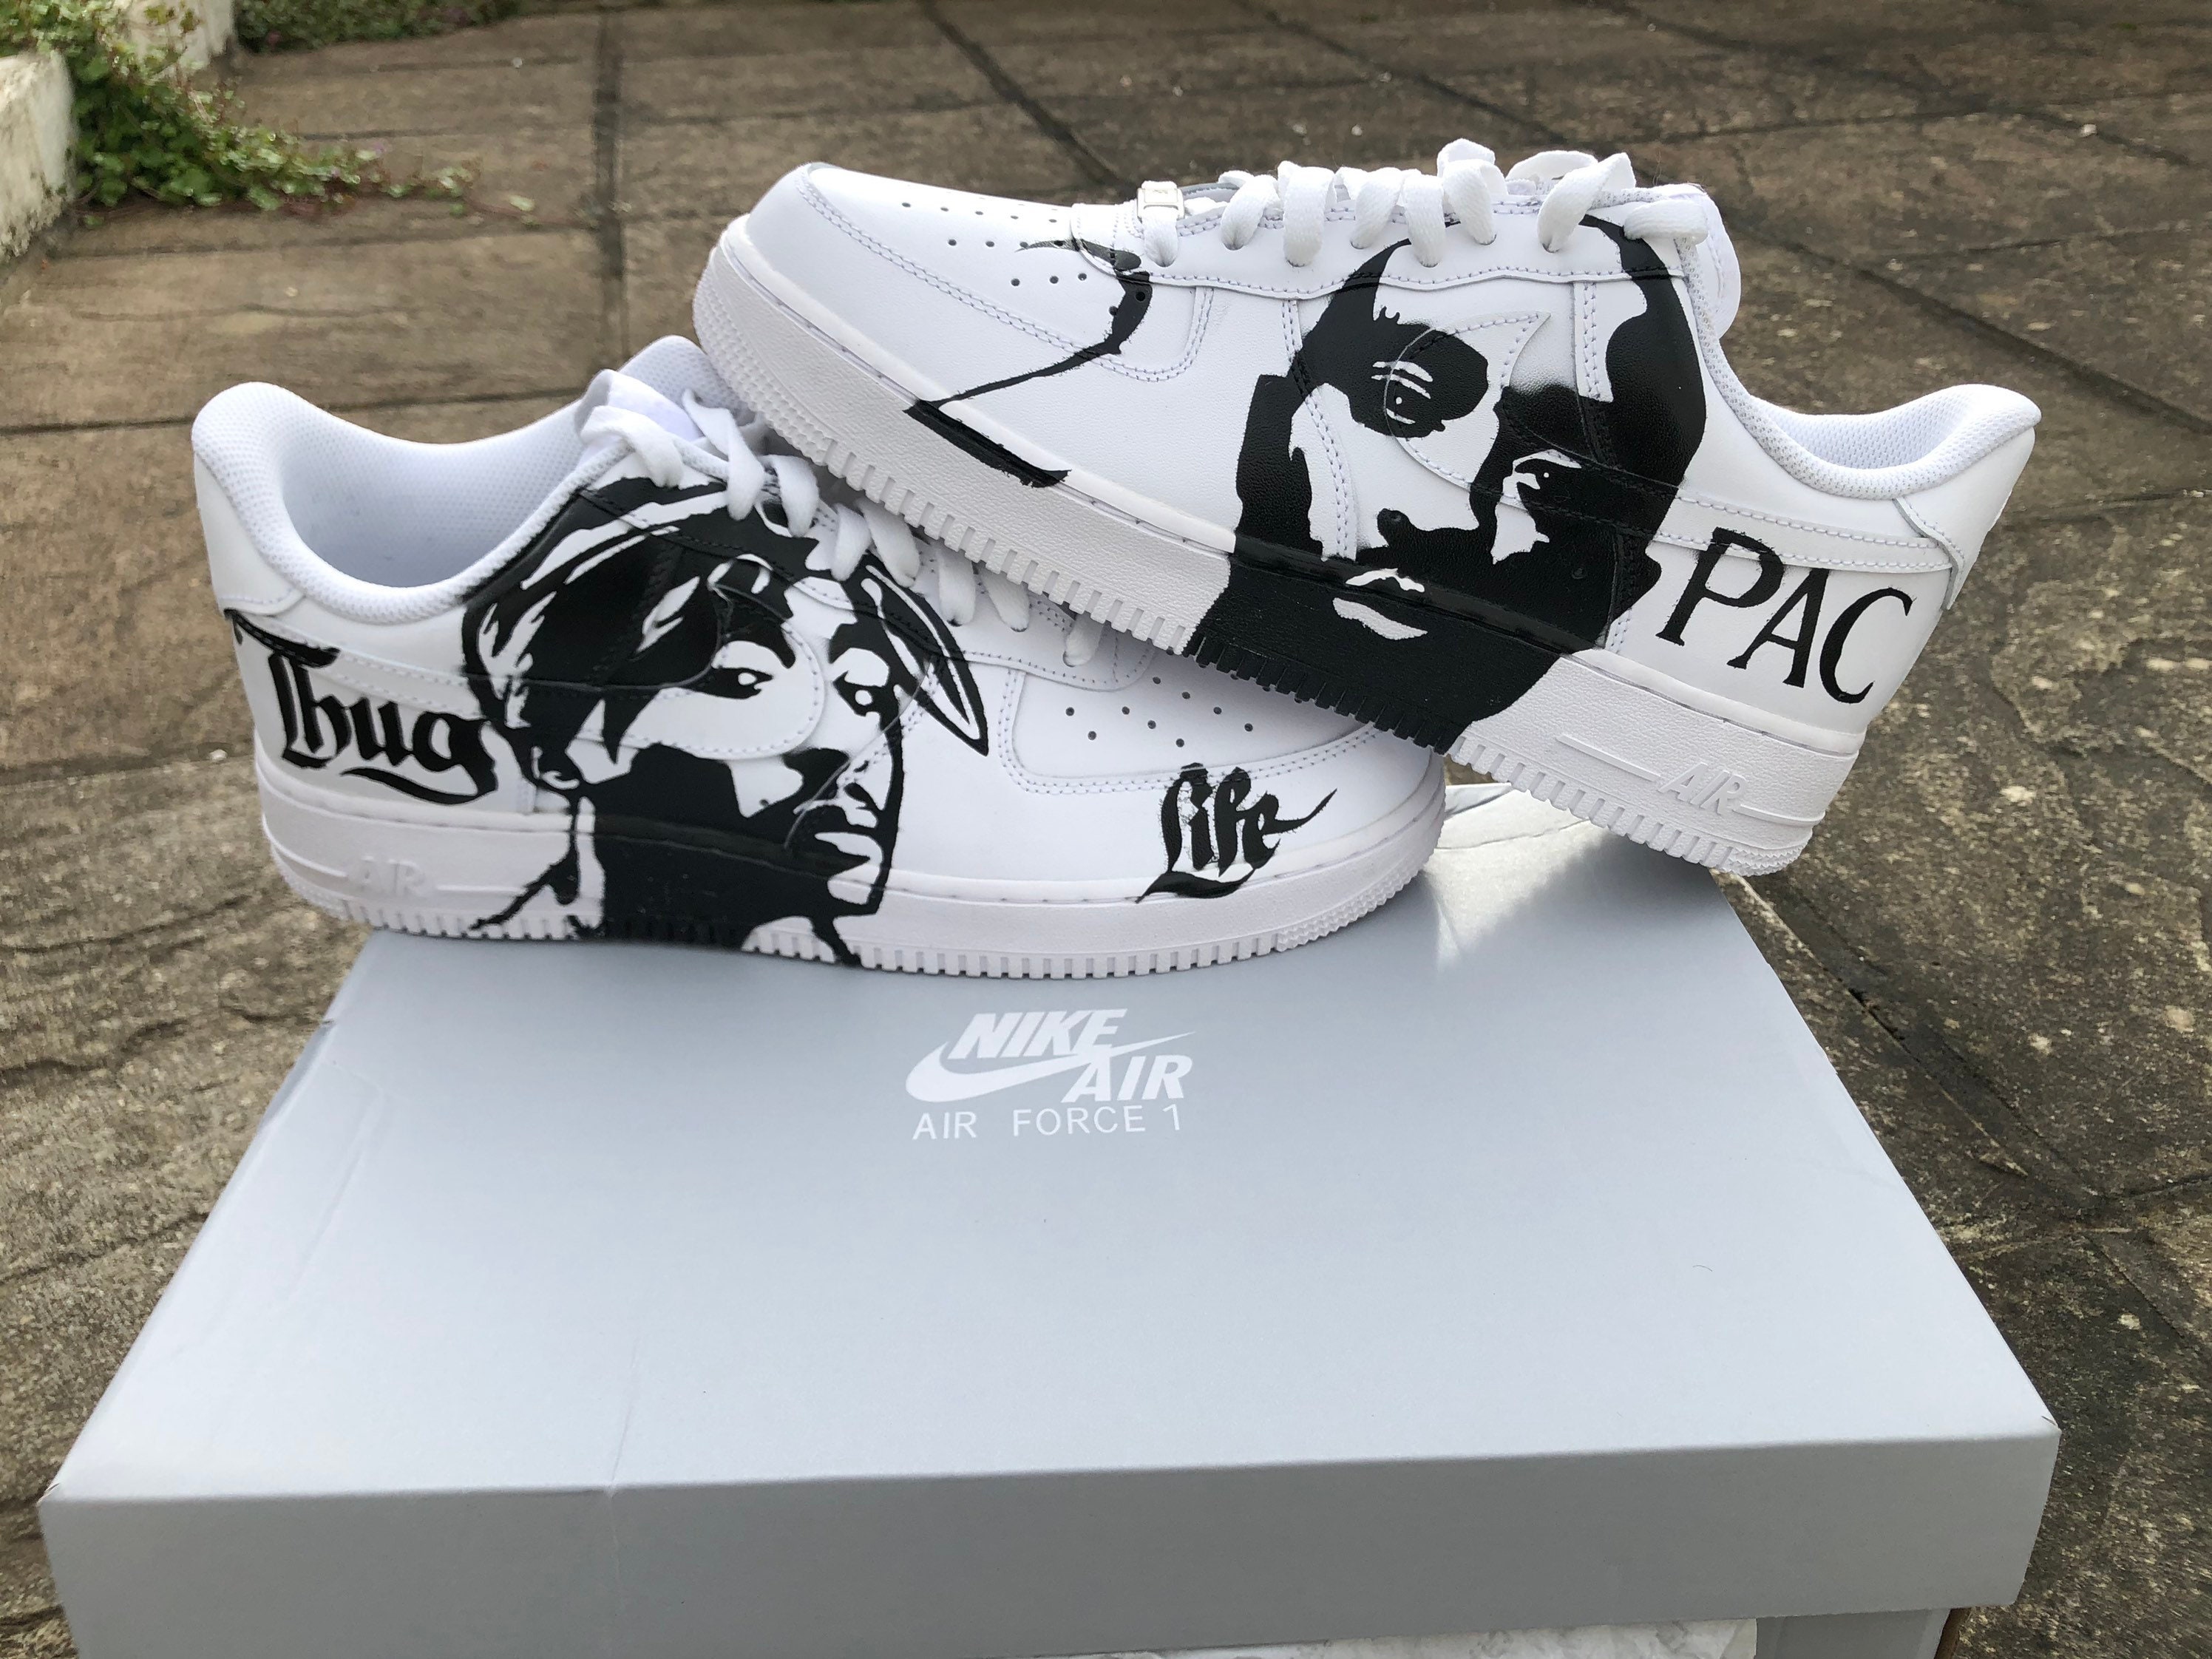 Trapstar Collaborates With 2Pac's Estate to Honor Rapper's Legacy